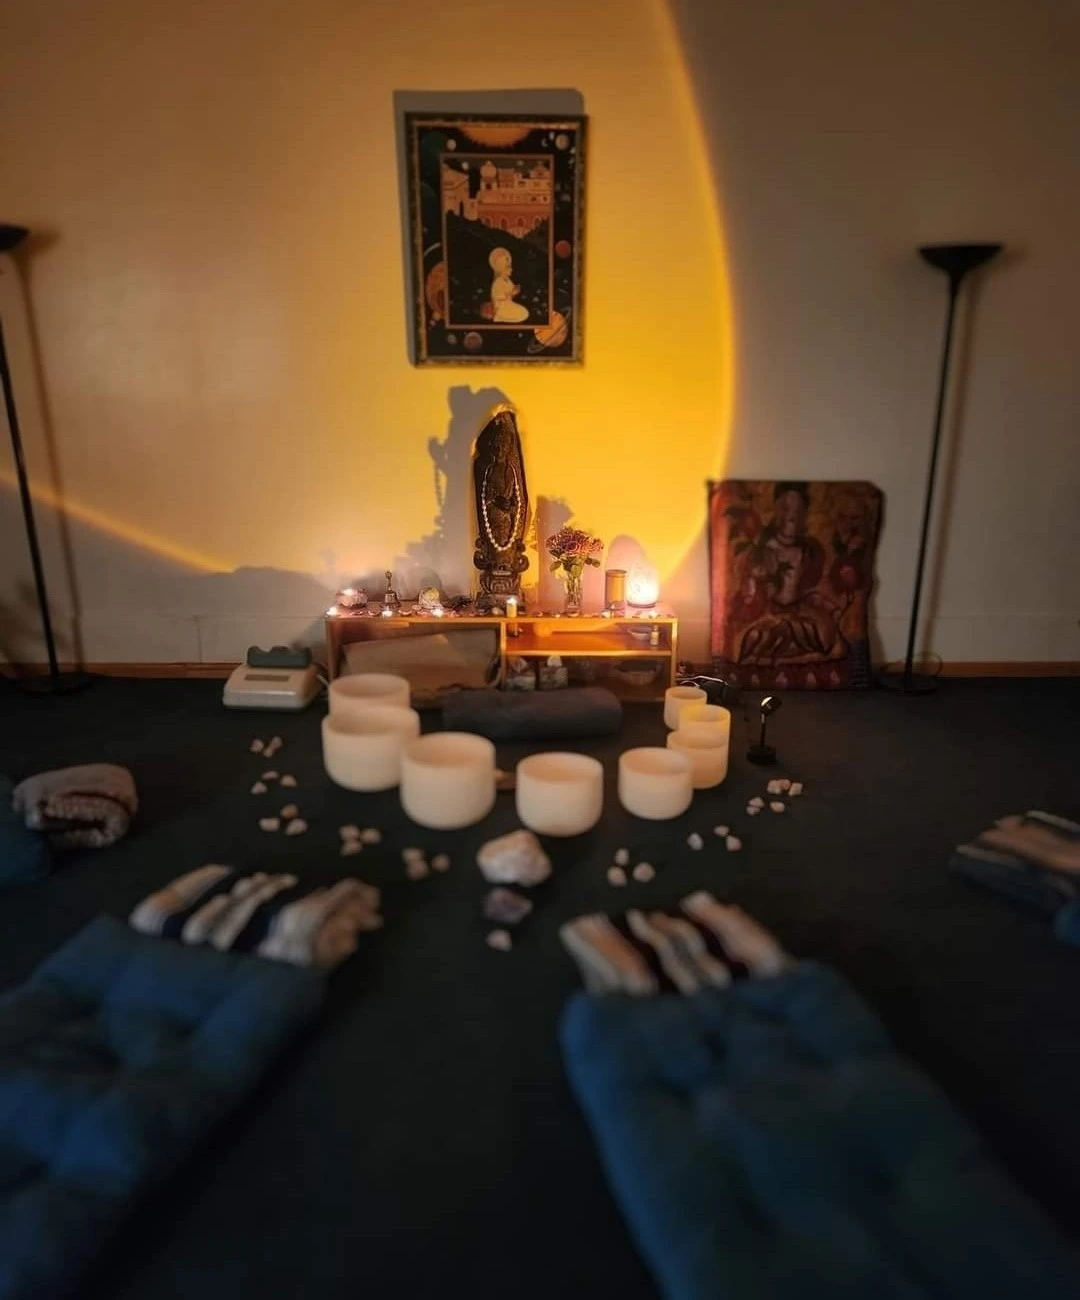 An altar with statues, candles, incense, and surrounded by singing bowls and blankets